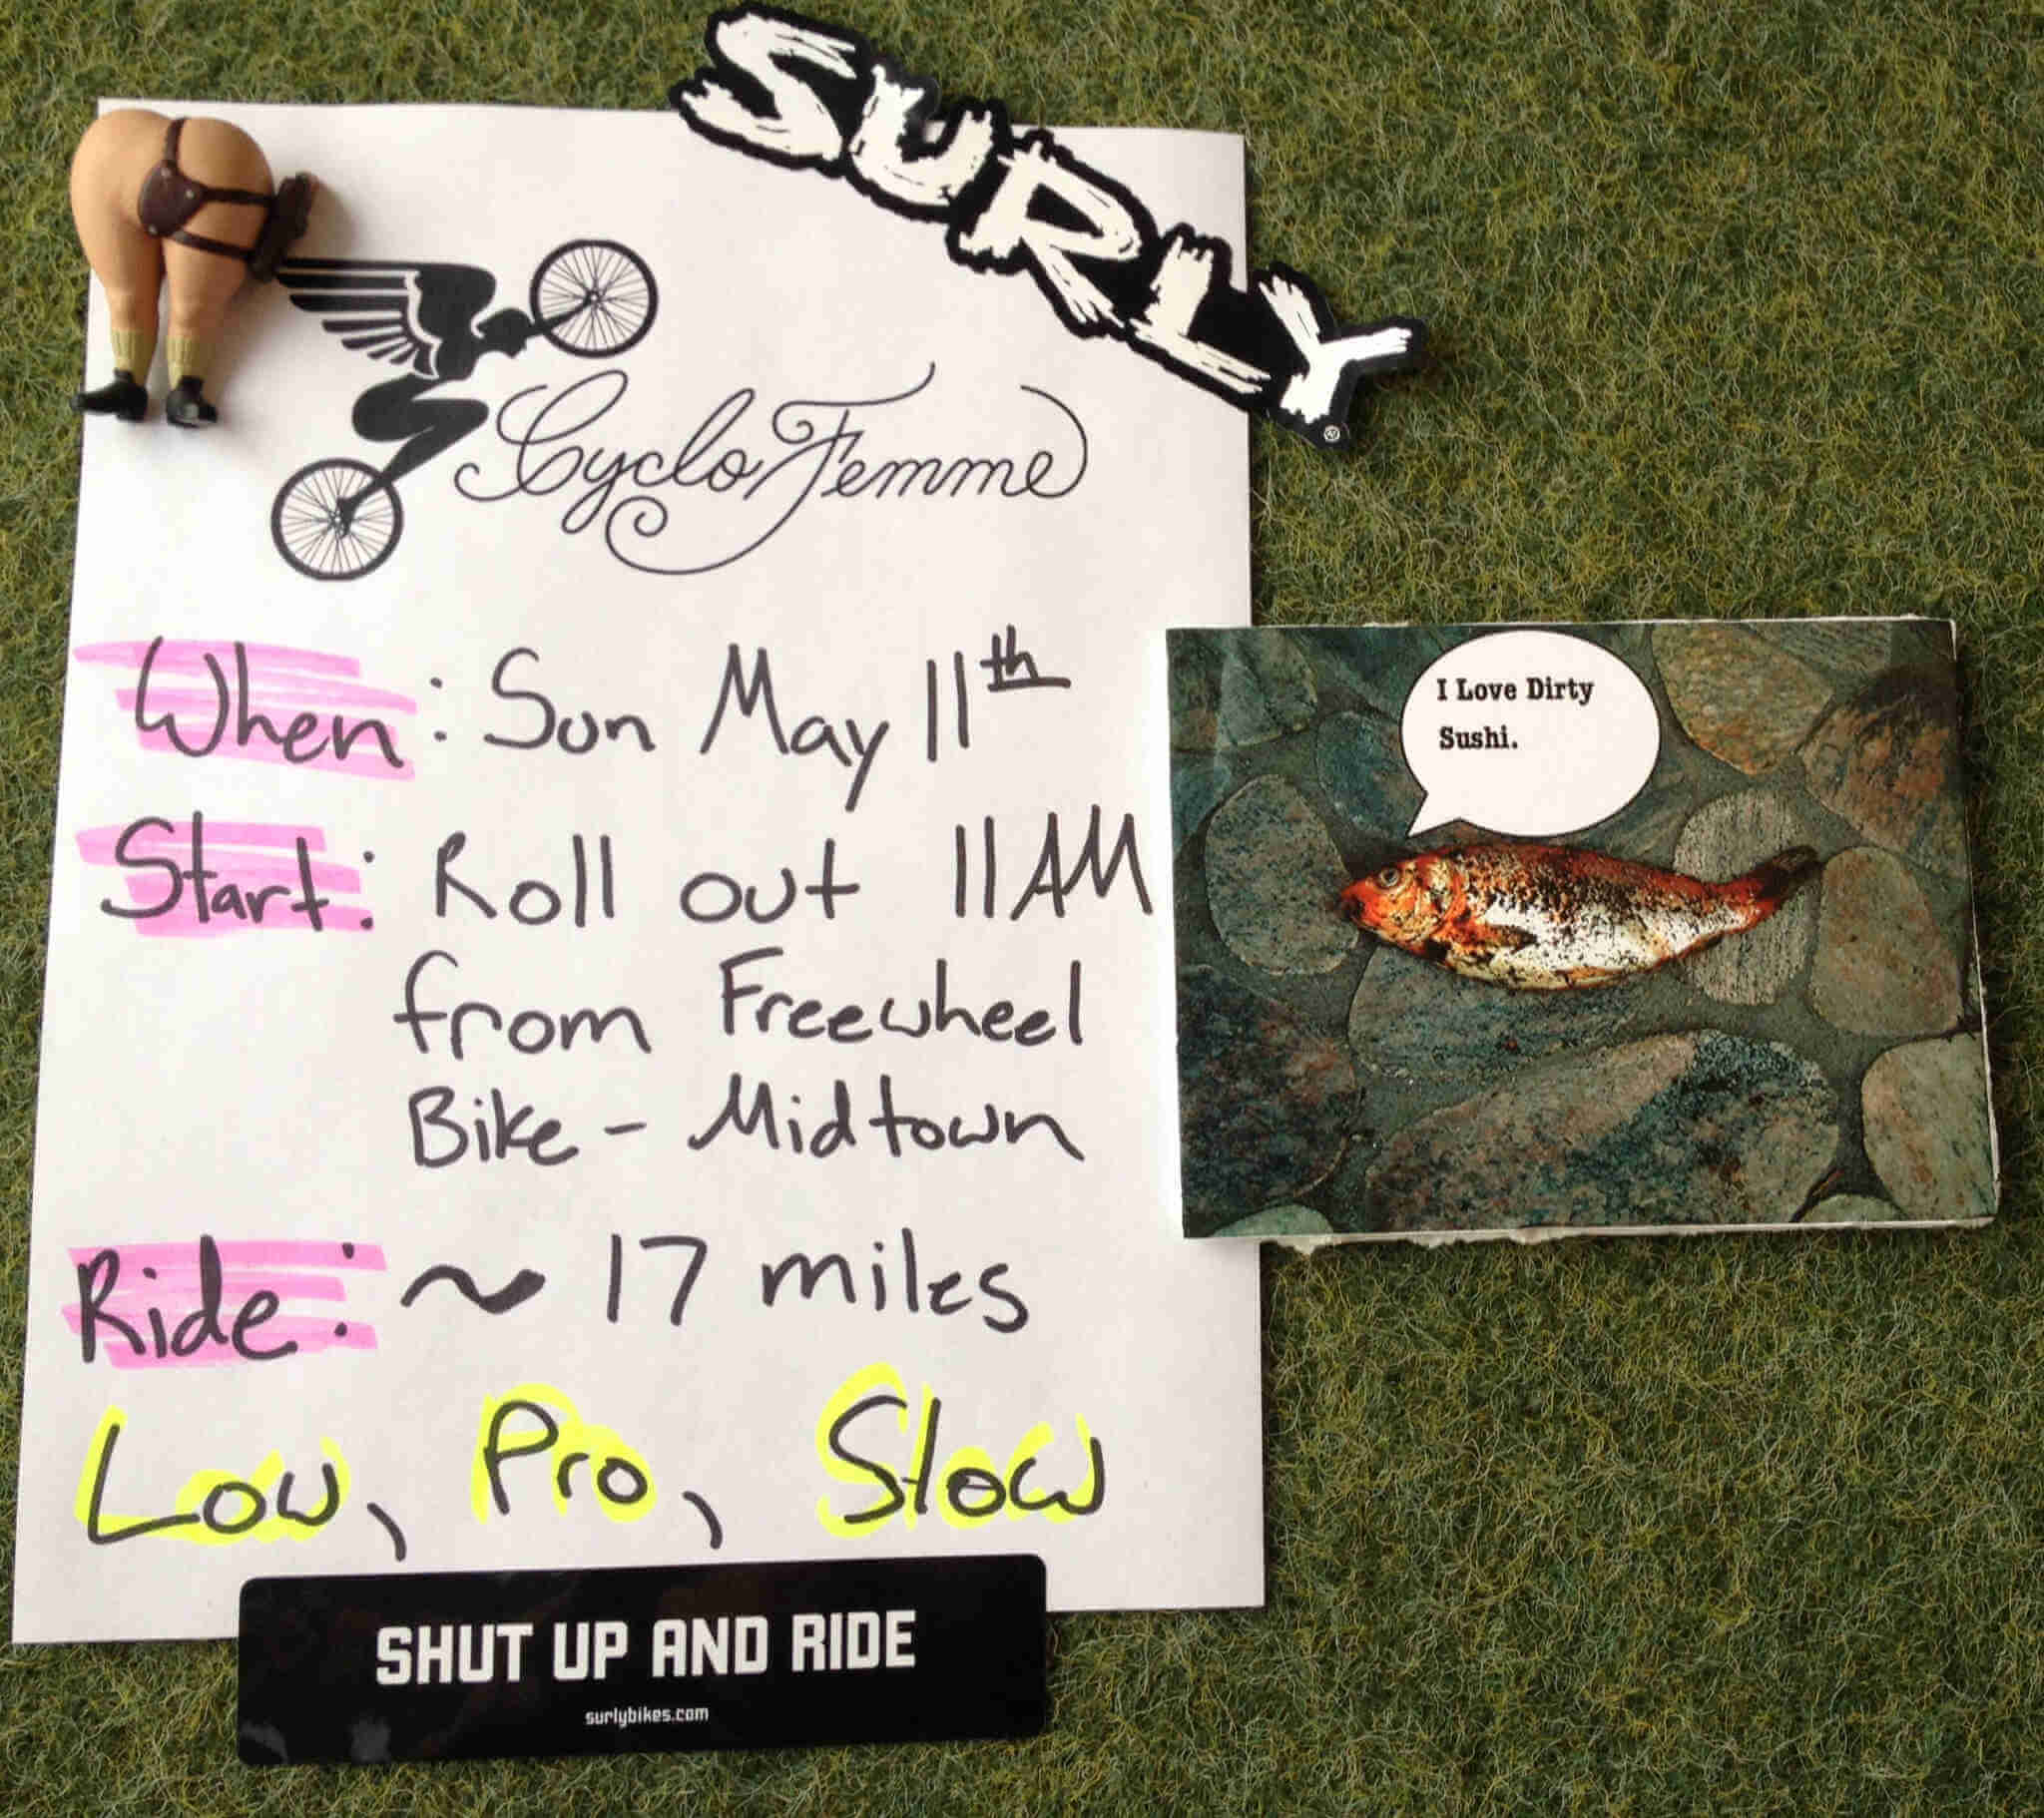 Downward view of a flyer for the Cyclofemme Surly bike event, on white paper, with written text and a Cyclofemme logo